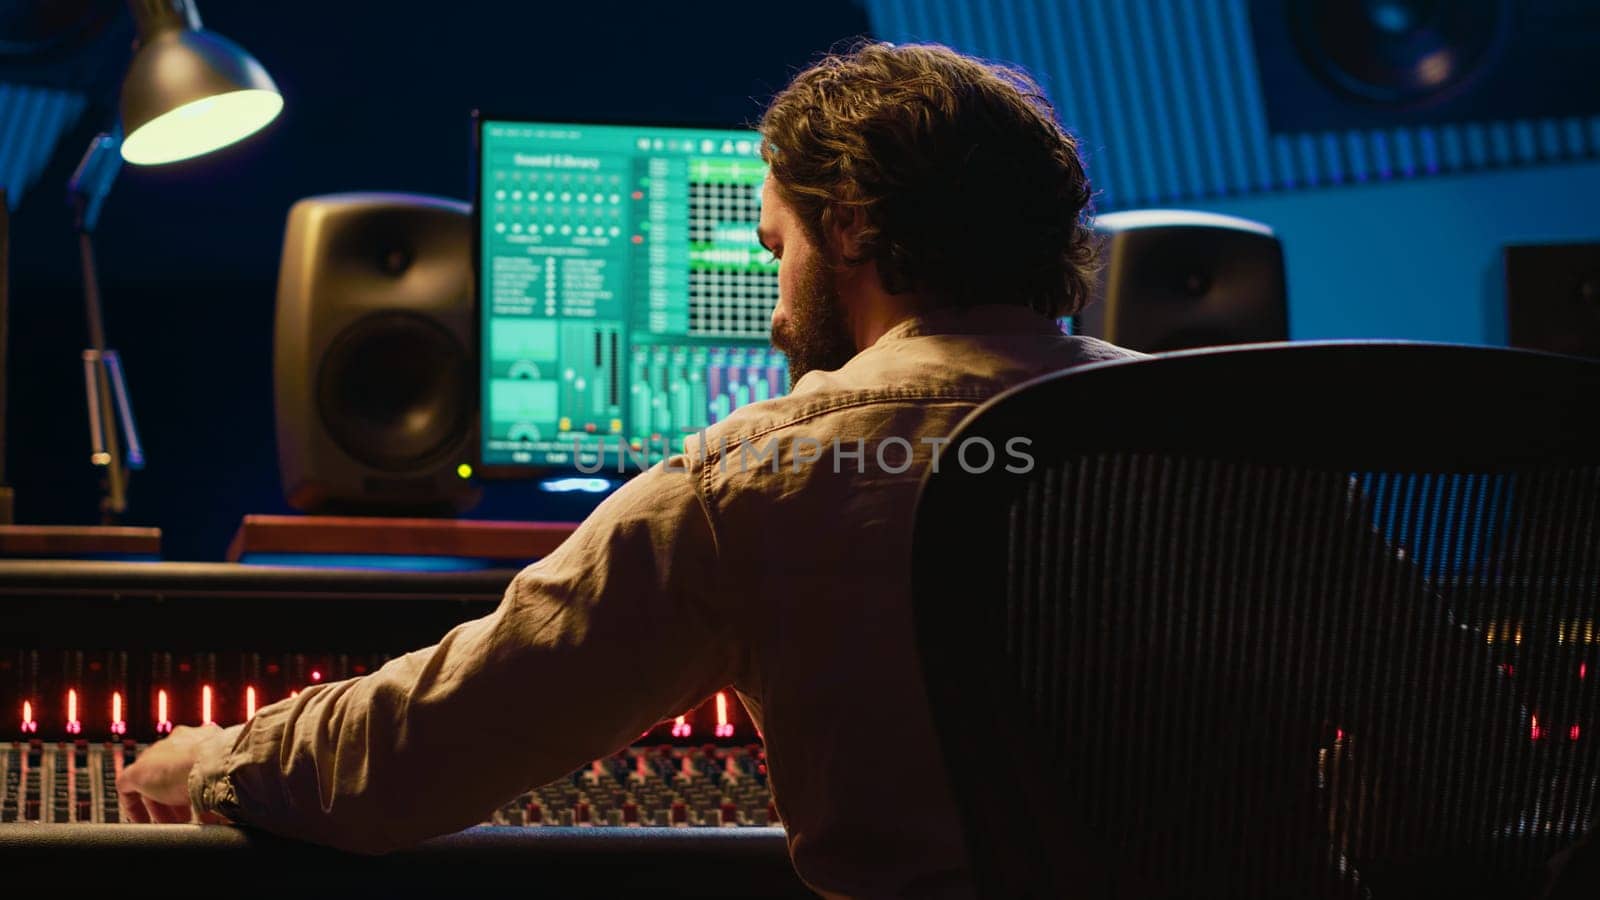 Sound designer mixing and mastering tracks on audio console in control room, using daw software on computer and editing files. Technician creating new music in professional studio. Camera A.